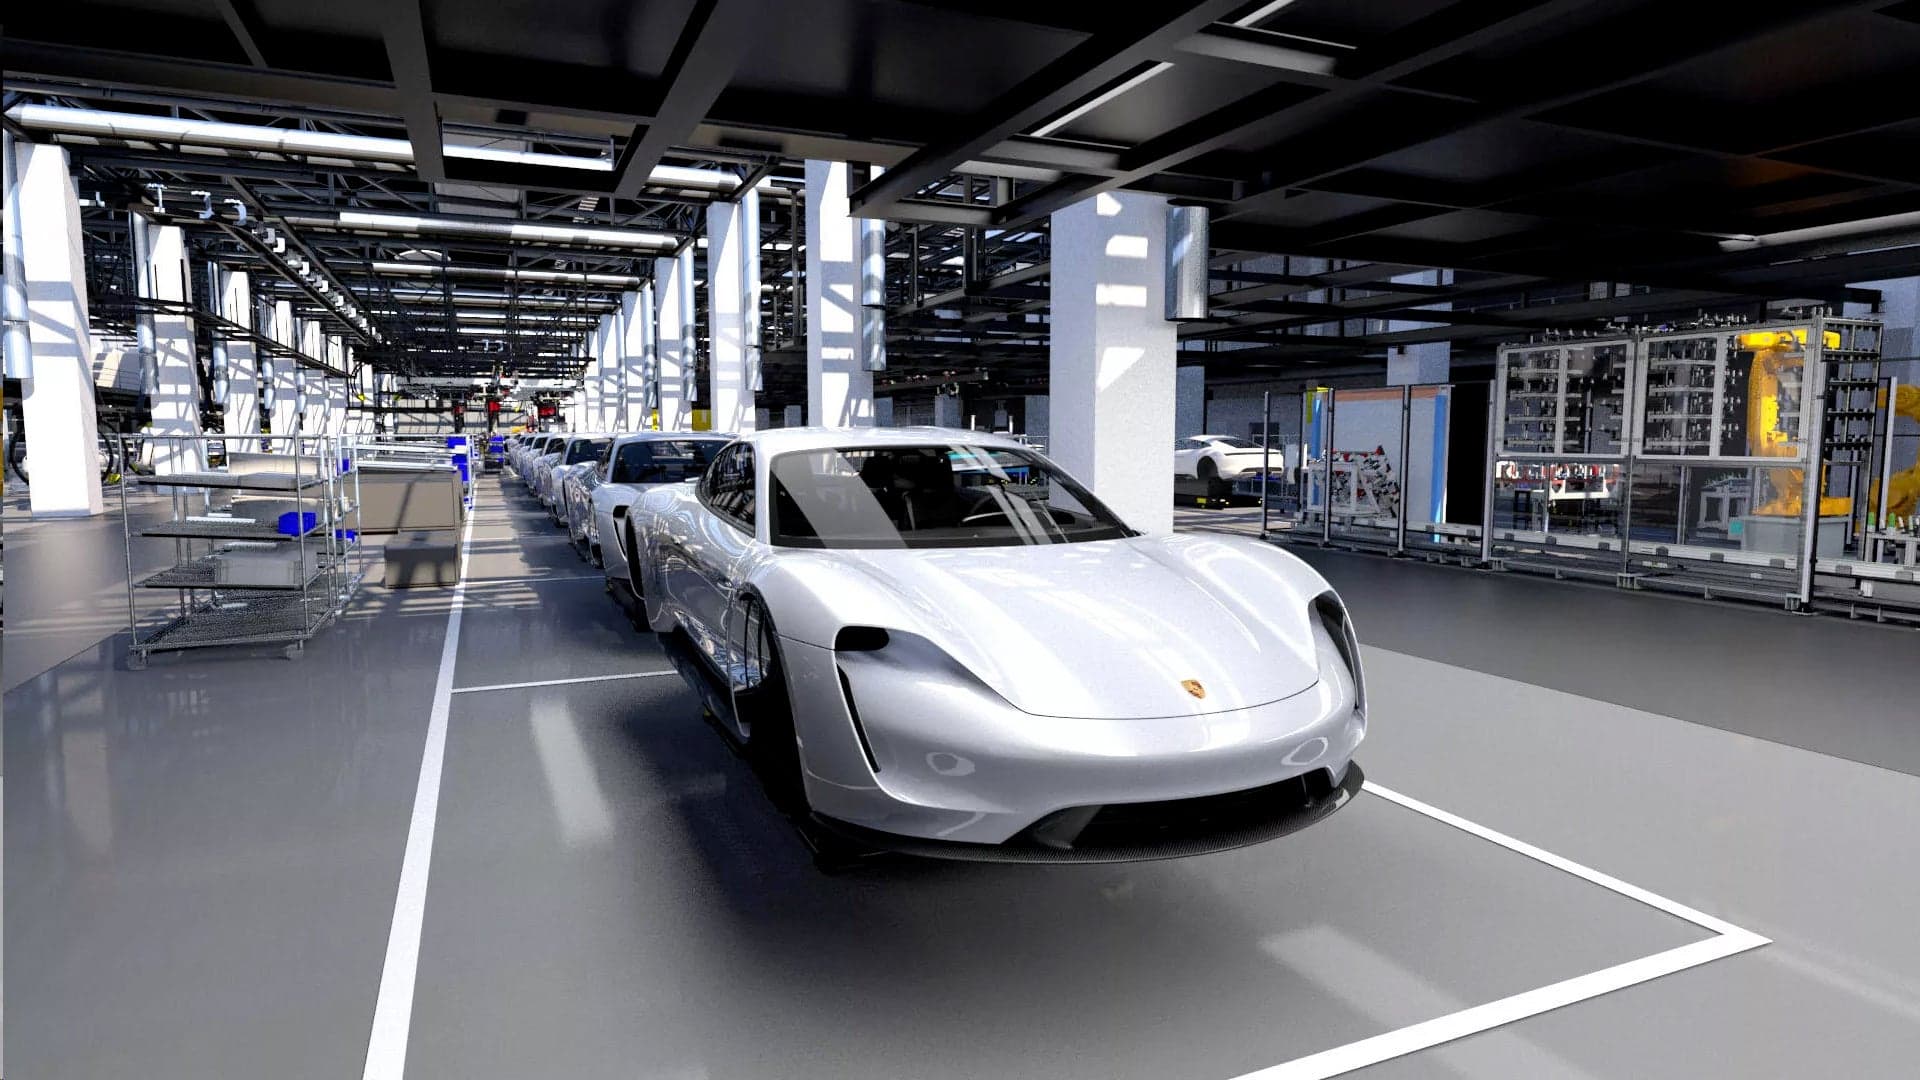 The Electric 2020 Porsche Taycan Will Be Revealed on September 4th via Livestream